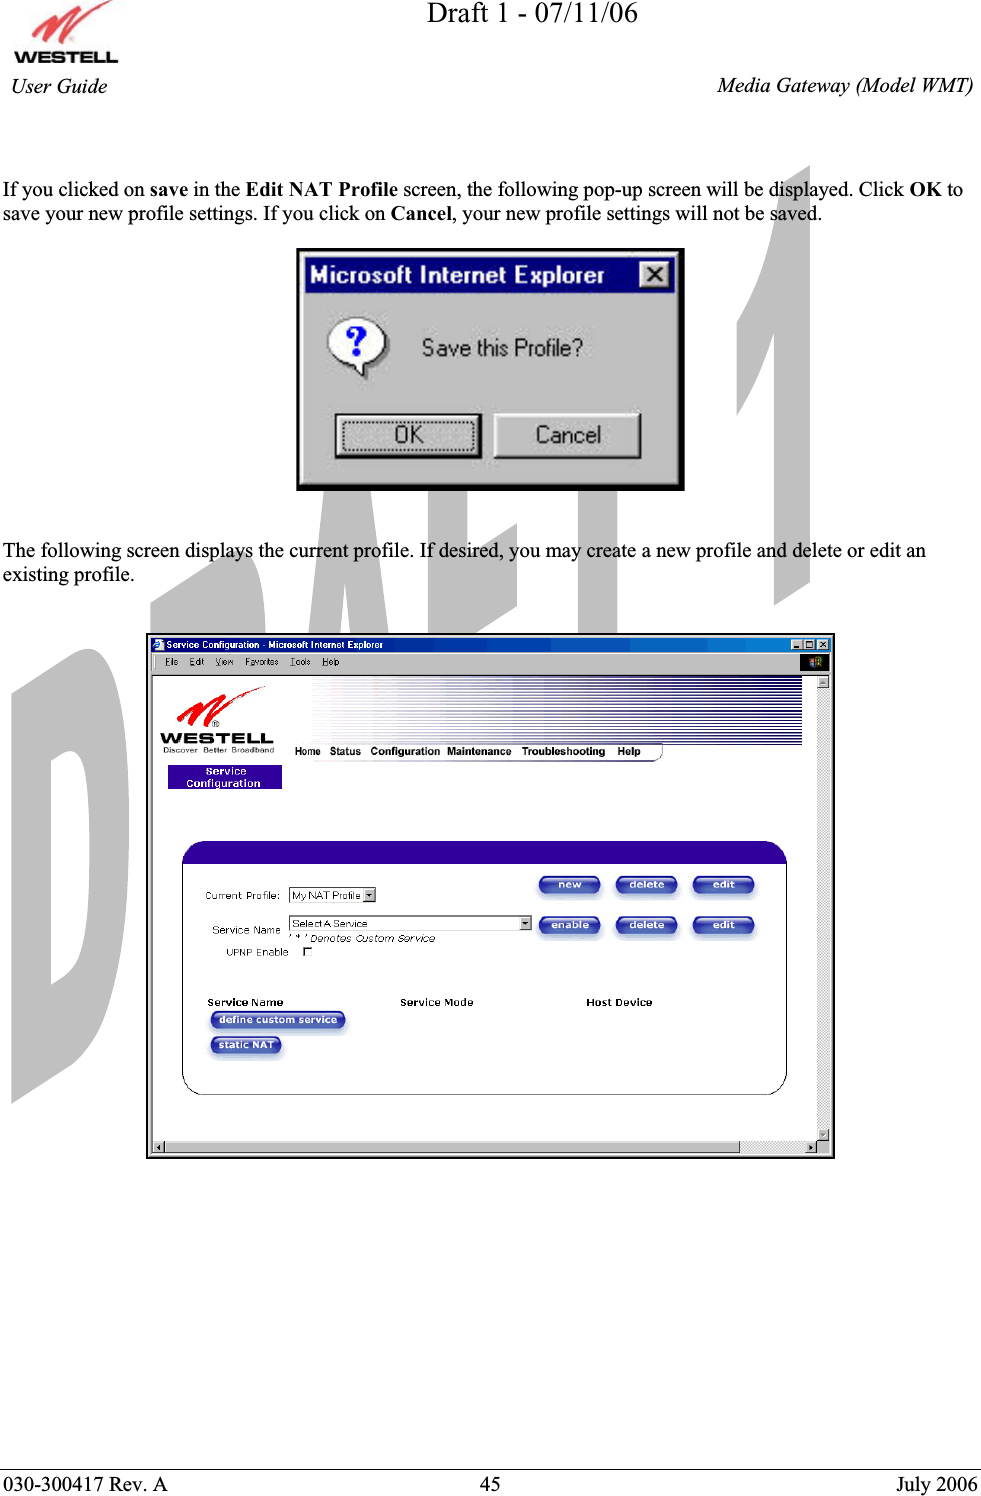 Draft 1 - 07/11/06030-300417 Rev. A  45  July 2006  Media Gateway (Model WMT) User Guide If you clicked on save in the Edit NAT Profile screen, the following pop-up screen will be displayed. Click OK to save your new profile settings. If you click on Cancel, your new profile settings will not be saved. The following screen displays the current profile. If desired, you may create a new profile and delete or edit an existing profile. 